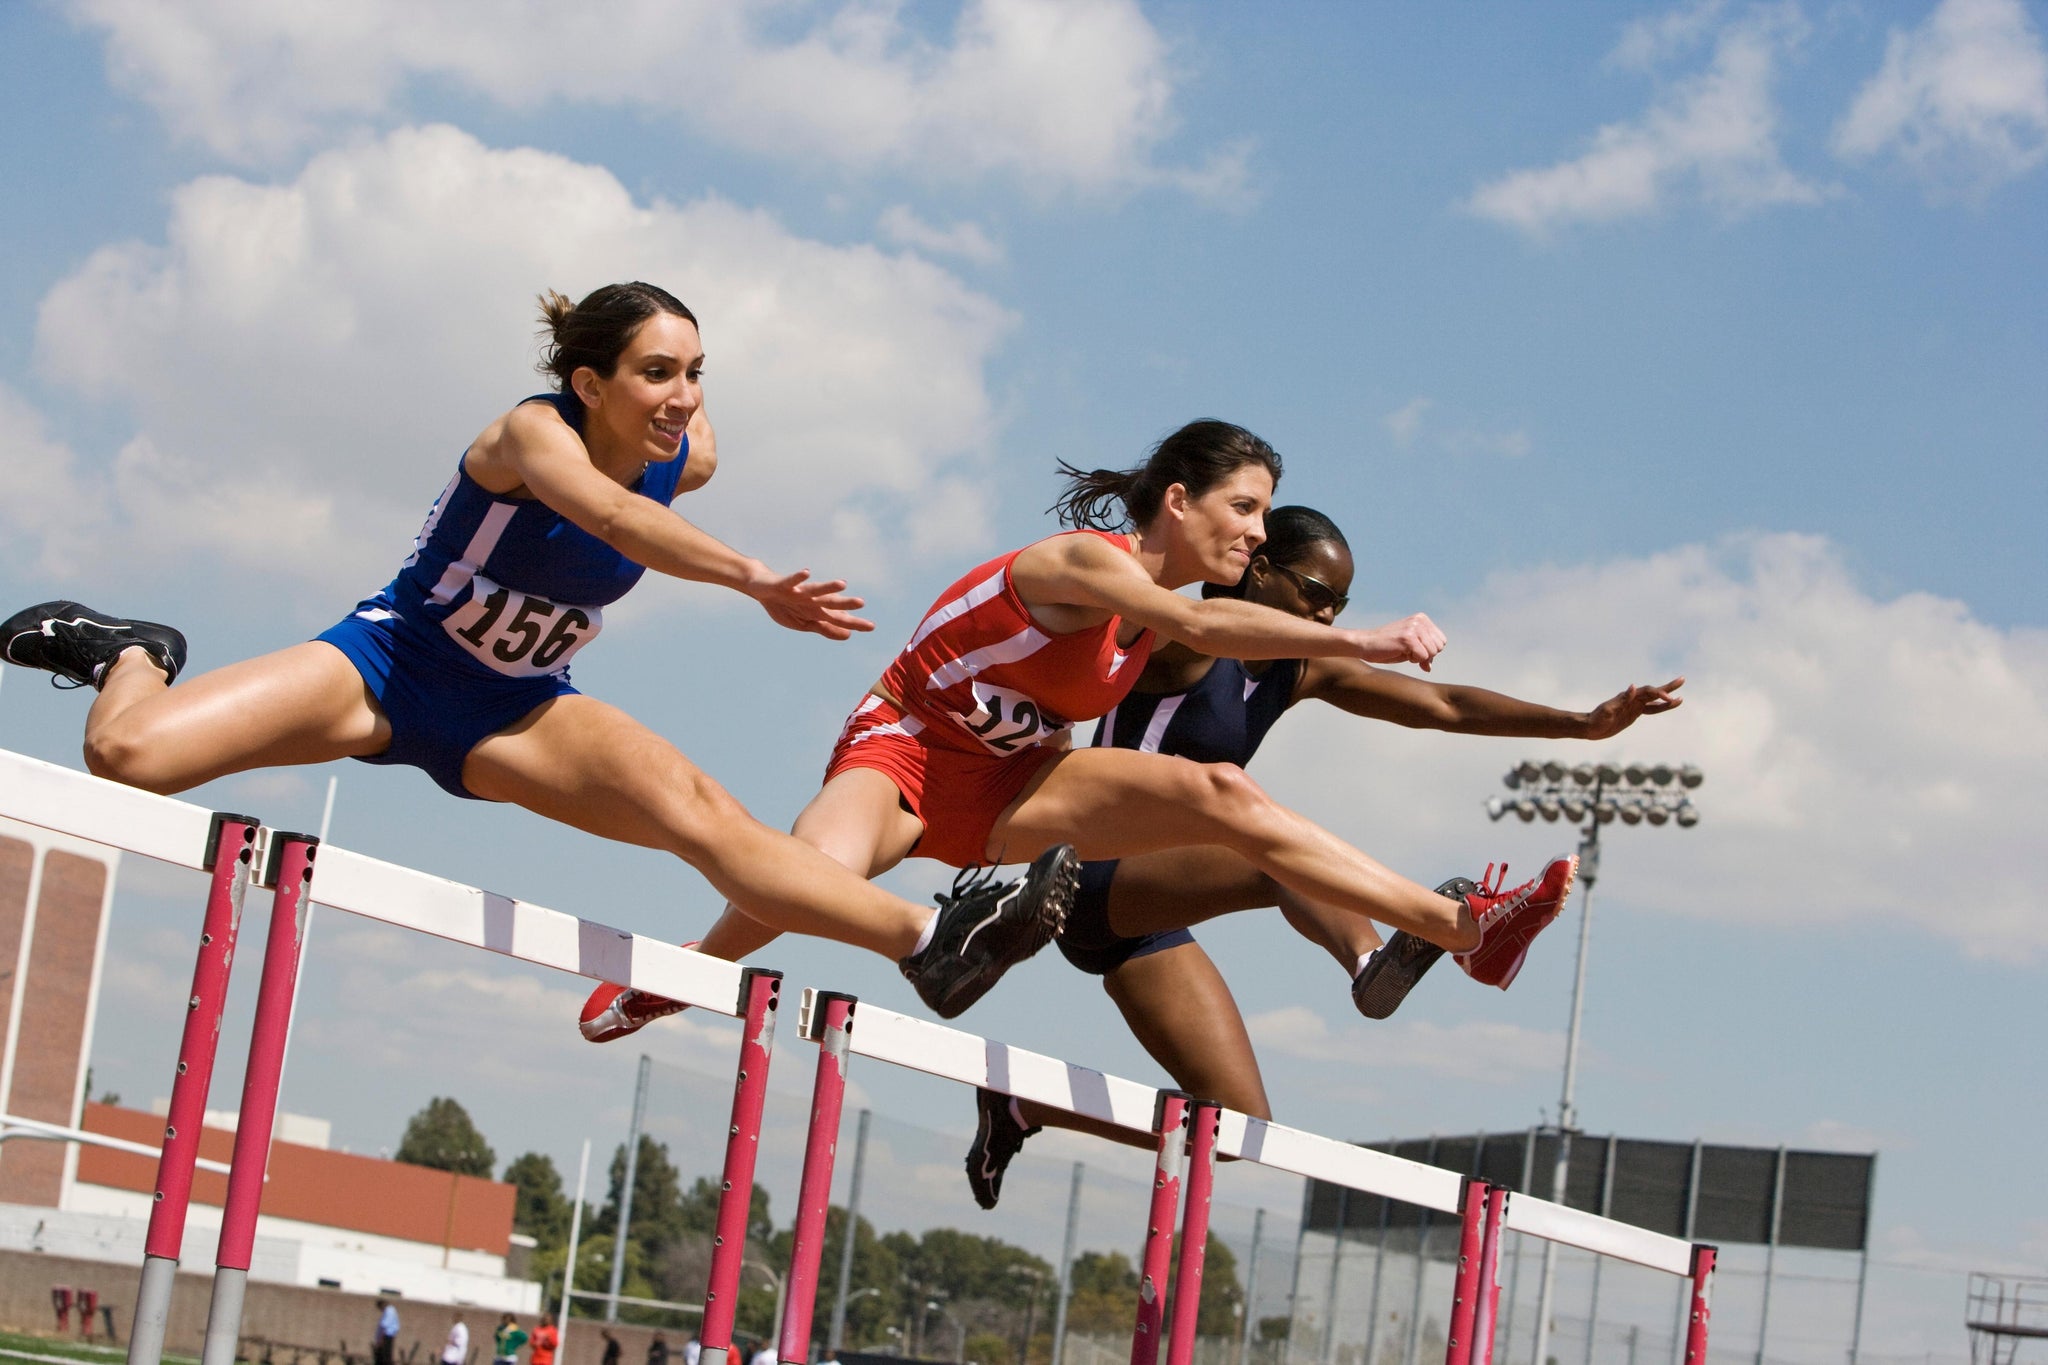 Three competitive female athletes who took liquid protein shots prior to the competition jump over a hurdle